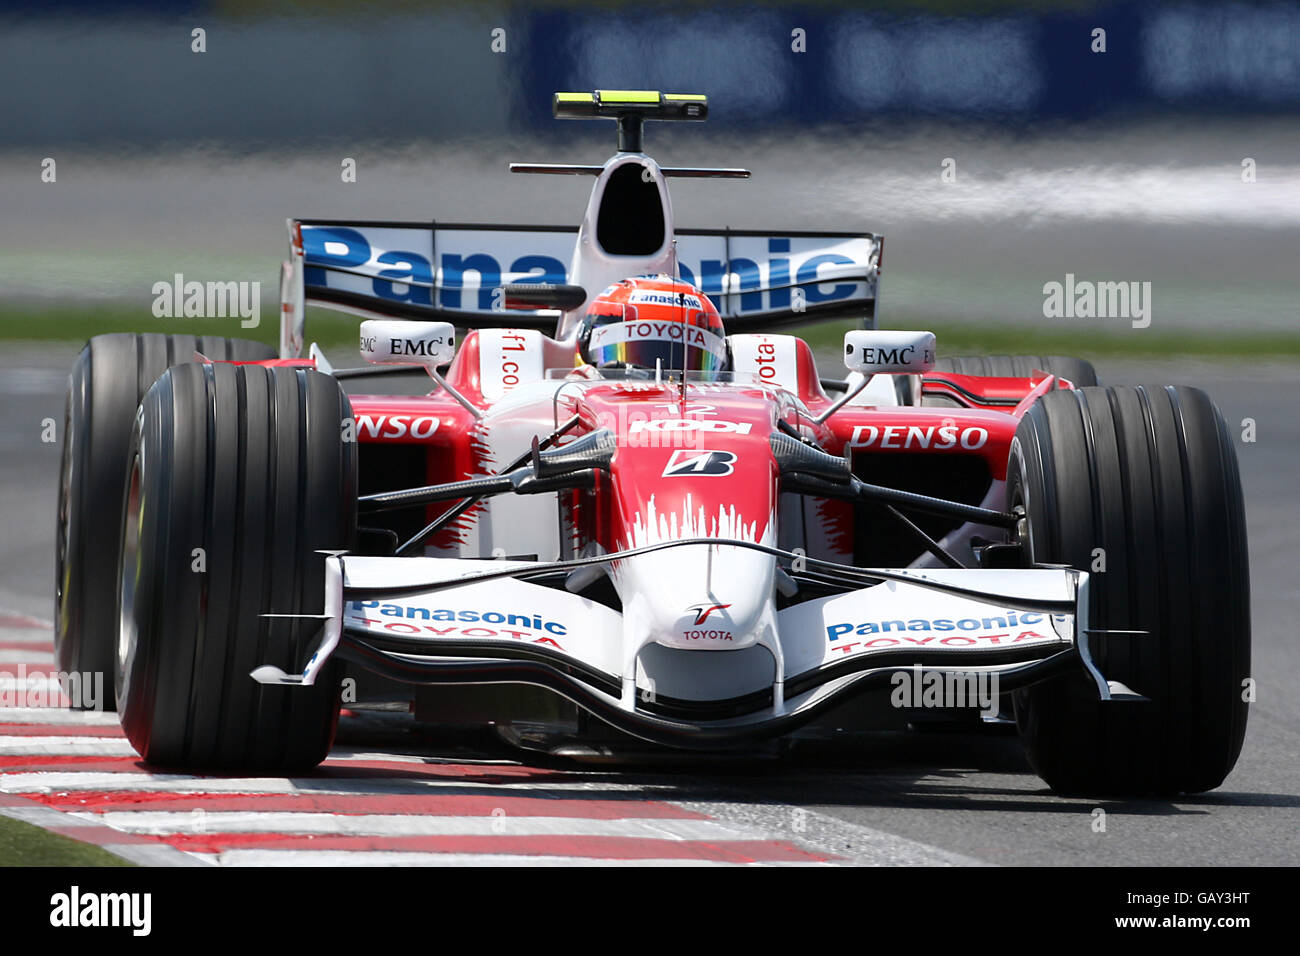 Toyota's Timo Glock during qualifying for the Grand Prix at Magny-Cours, Nevers, France. Stock Photo